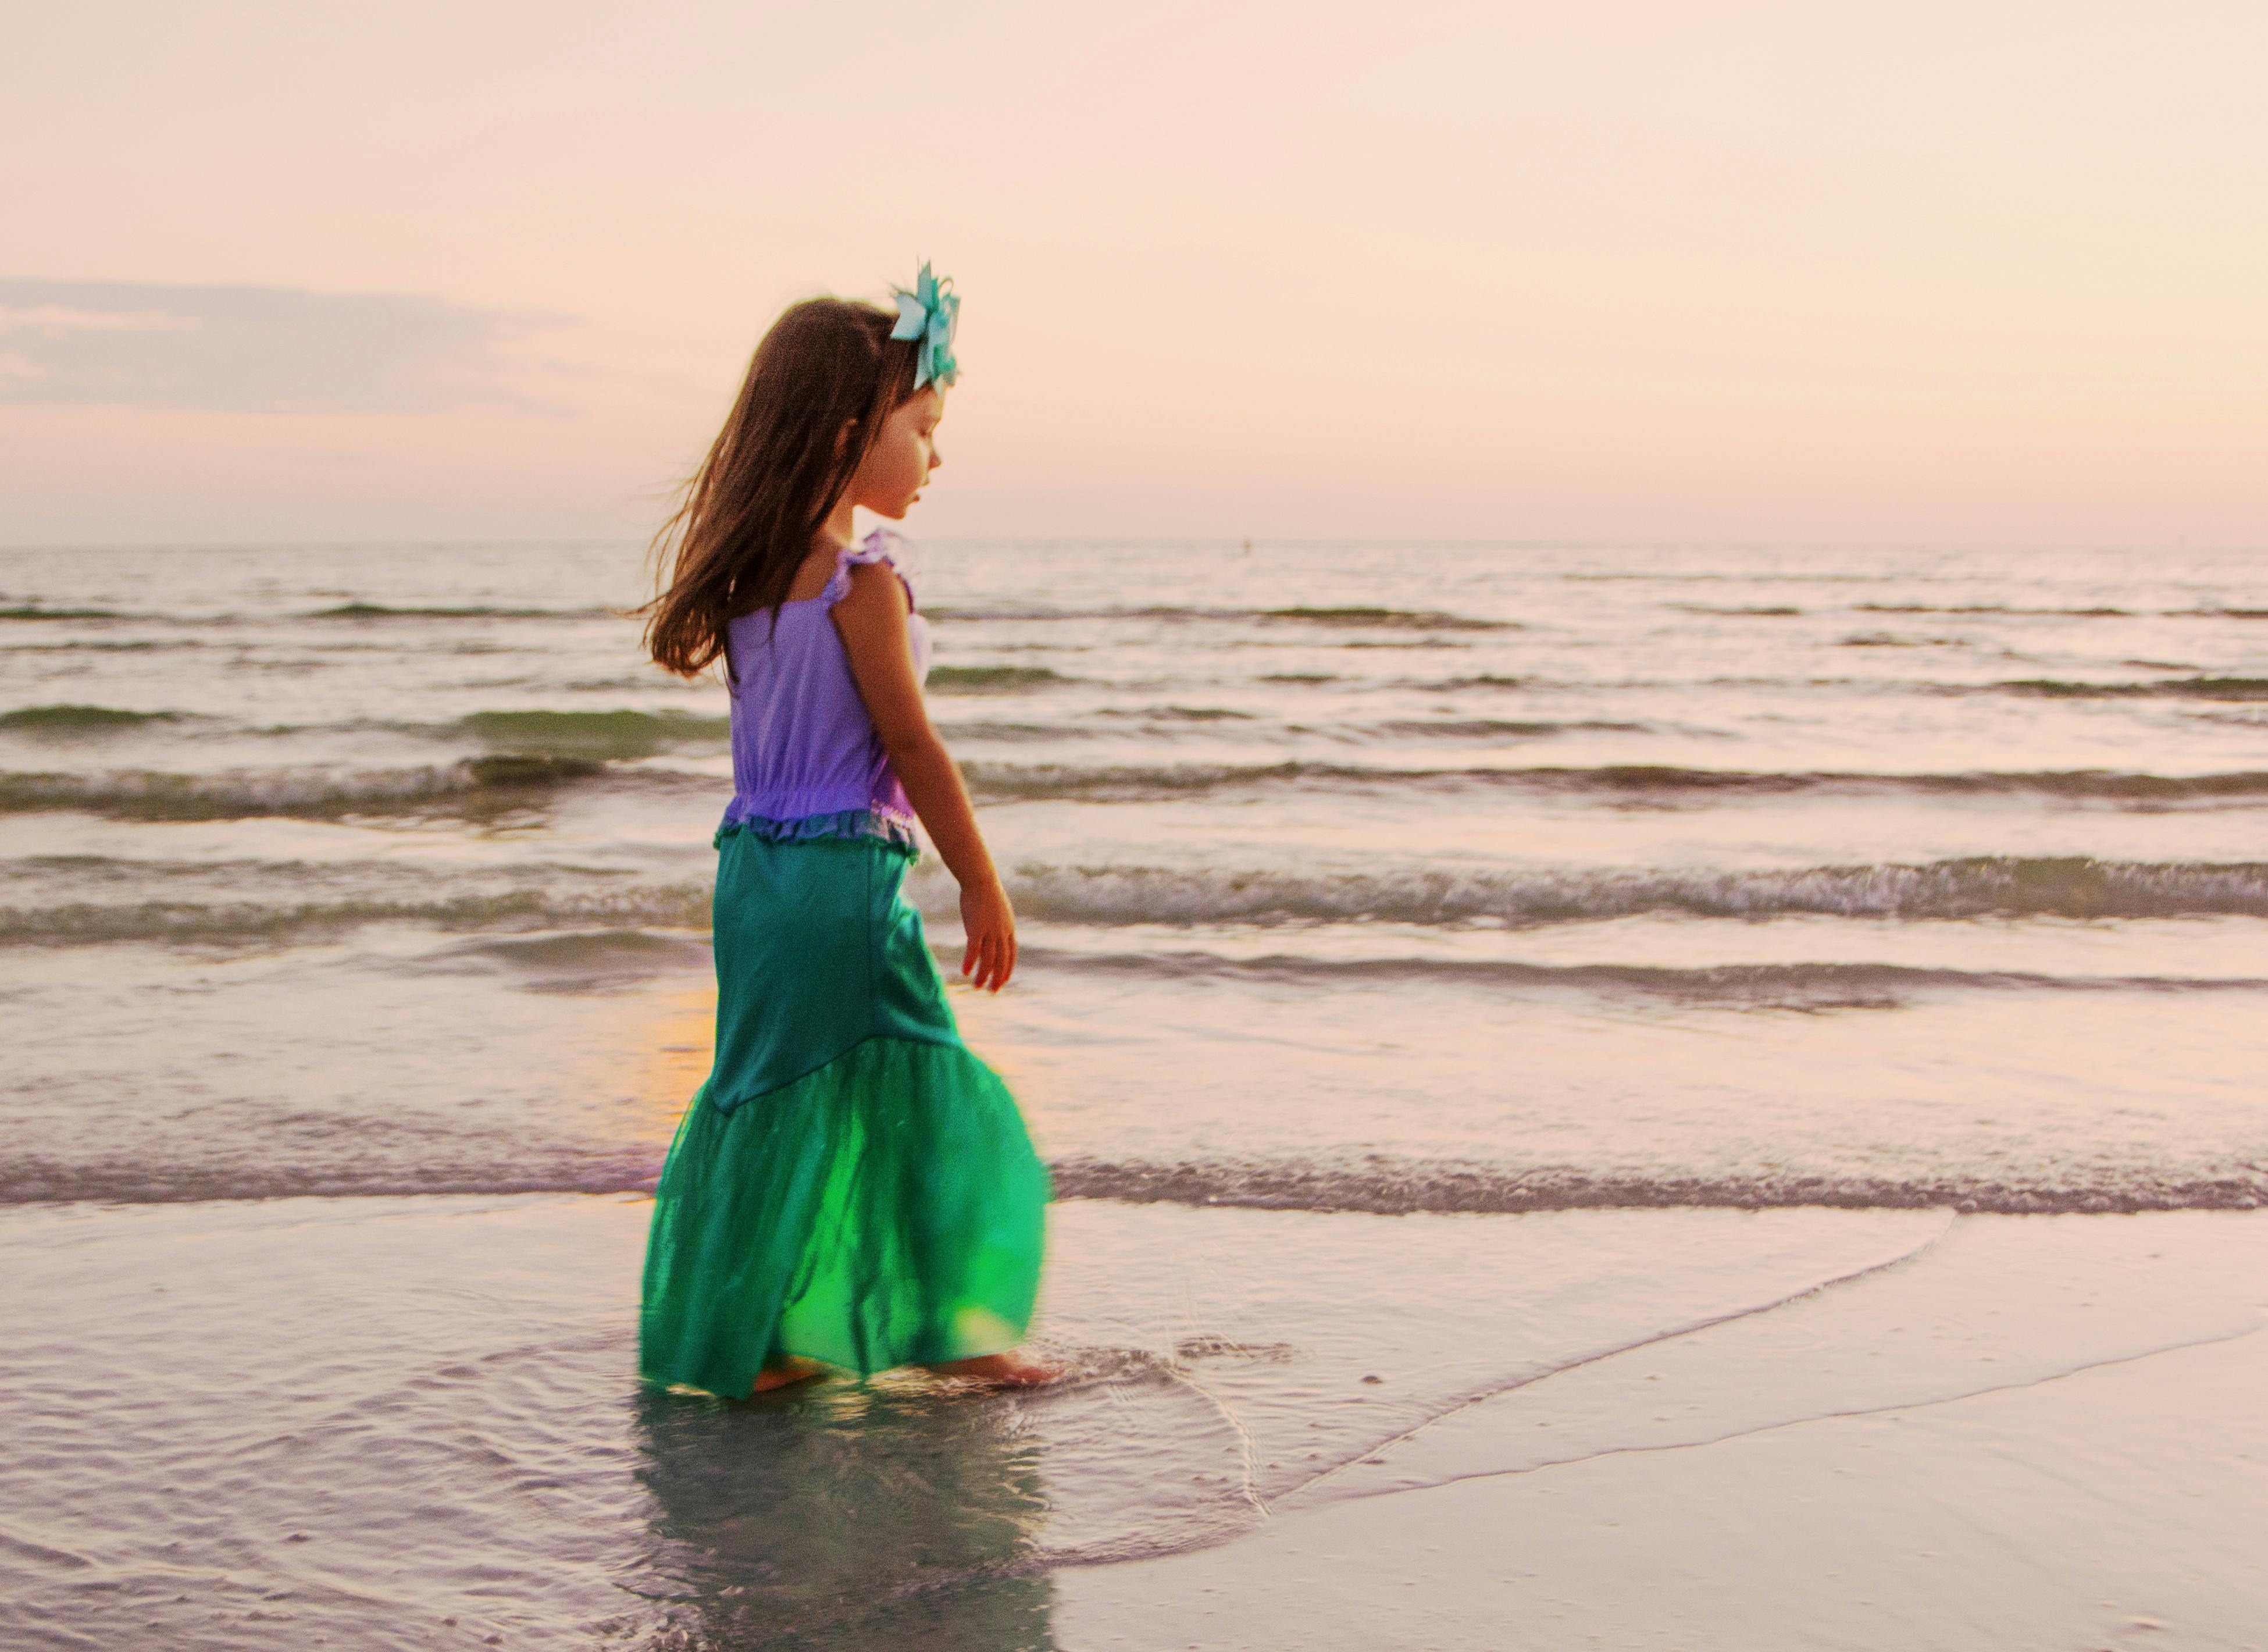 Free stock photo of Little Mermaid at the Sea